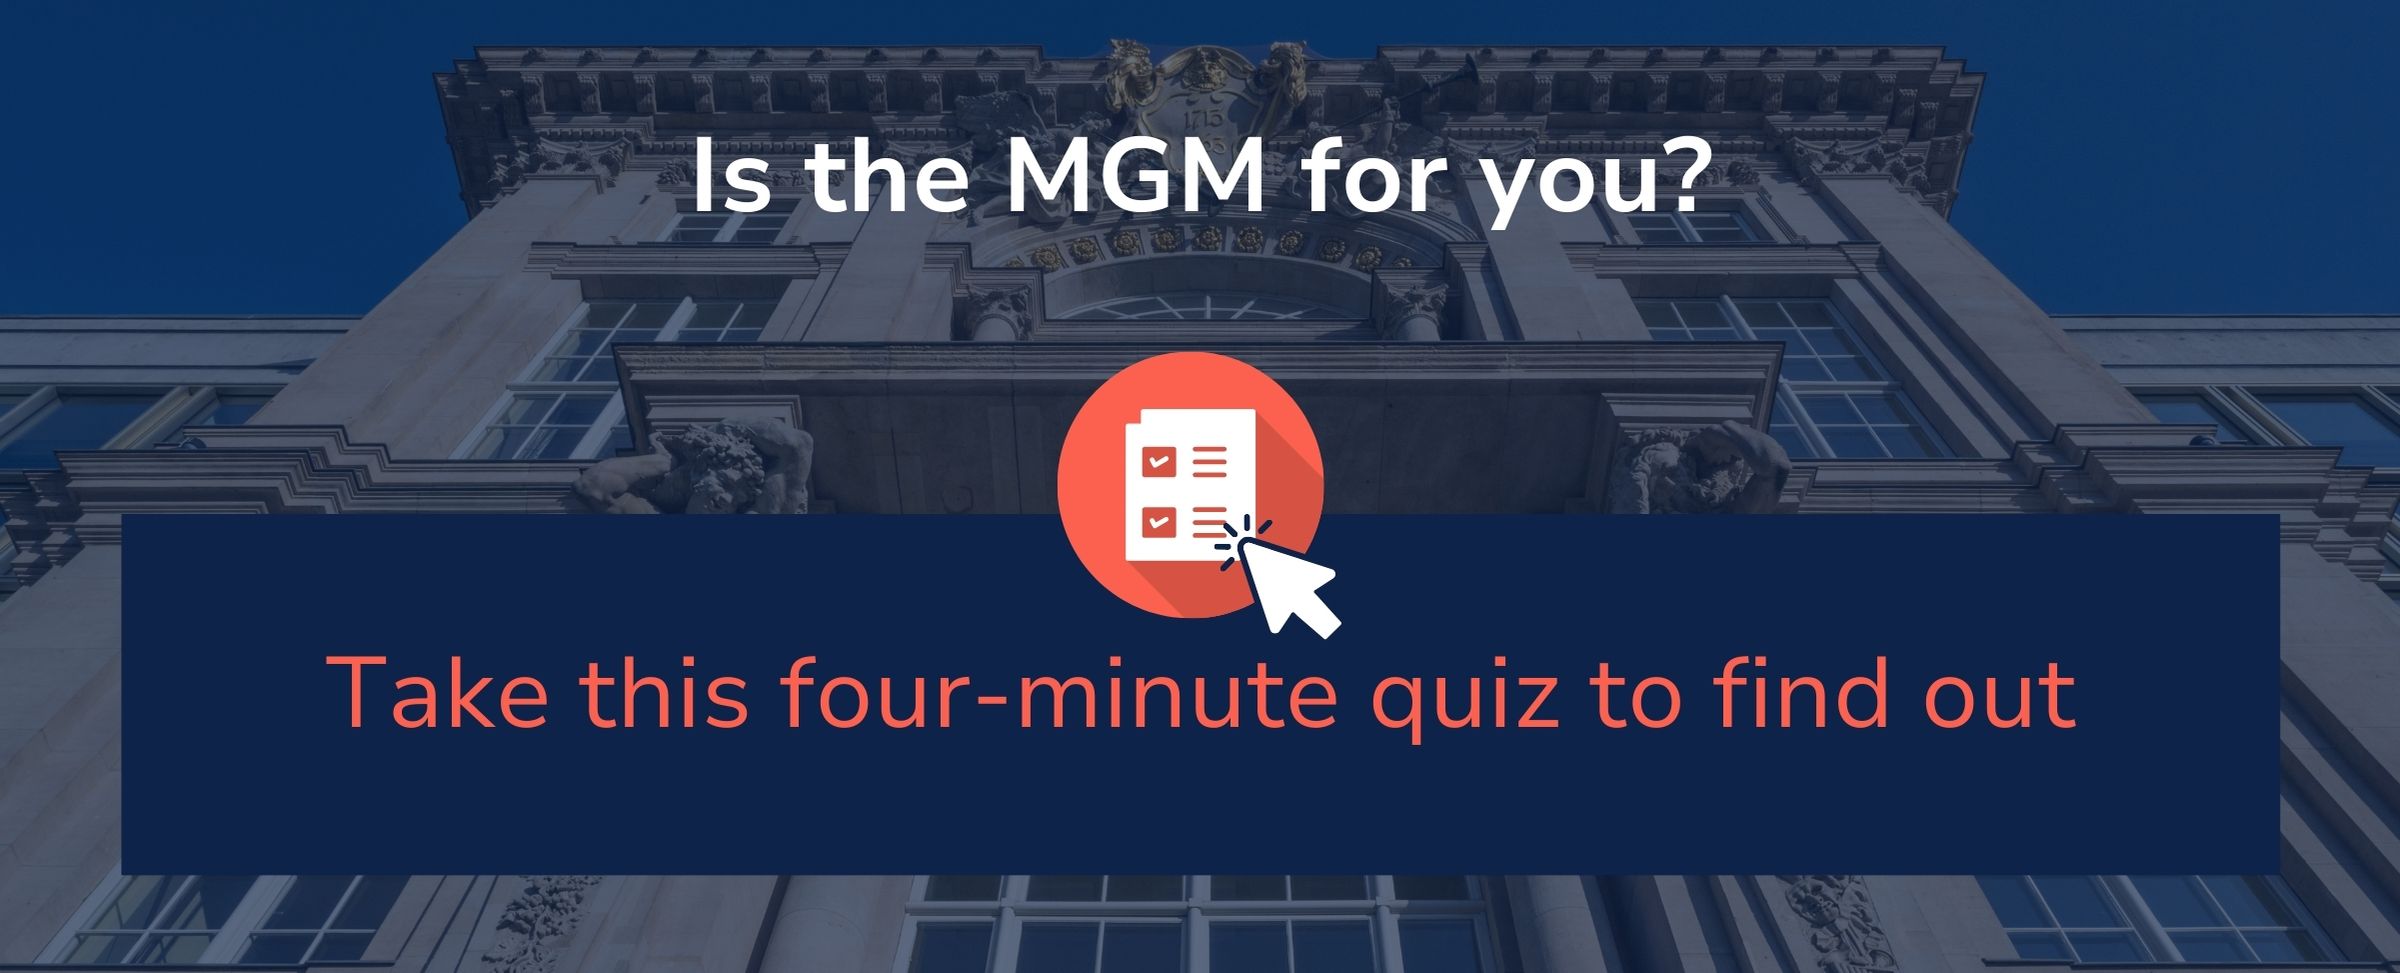 Is the MGM for you? Take this quiz to find out. Image link